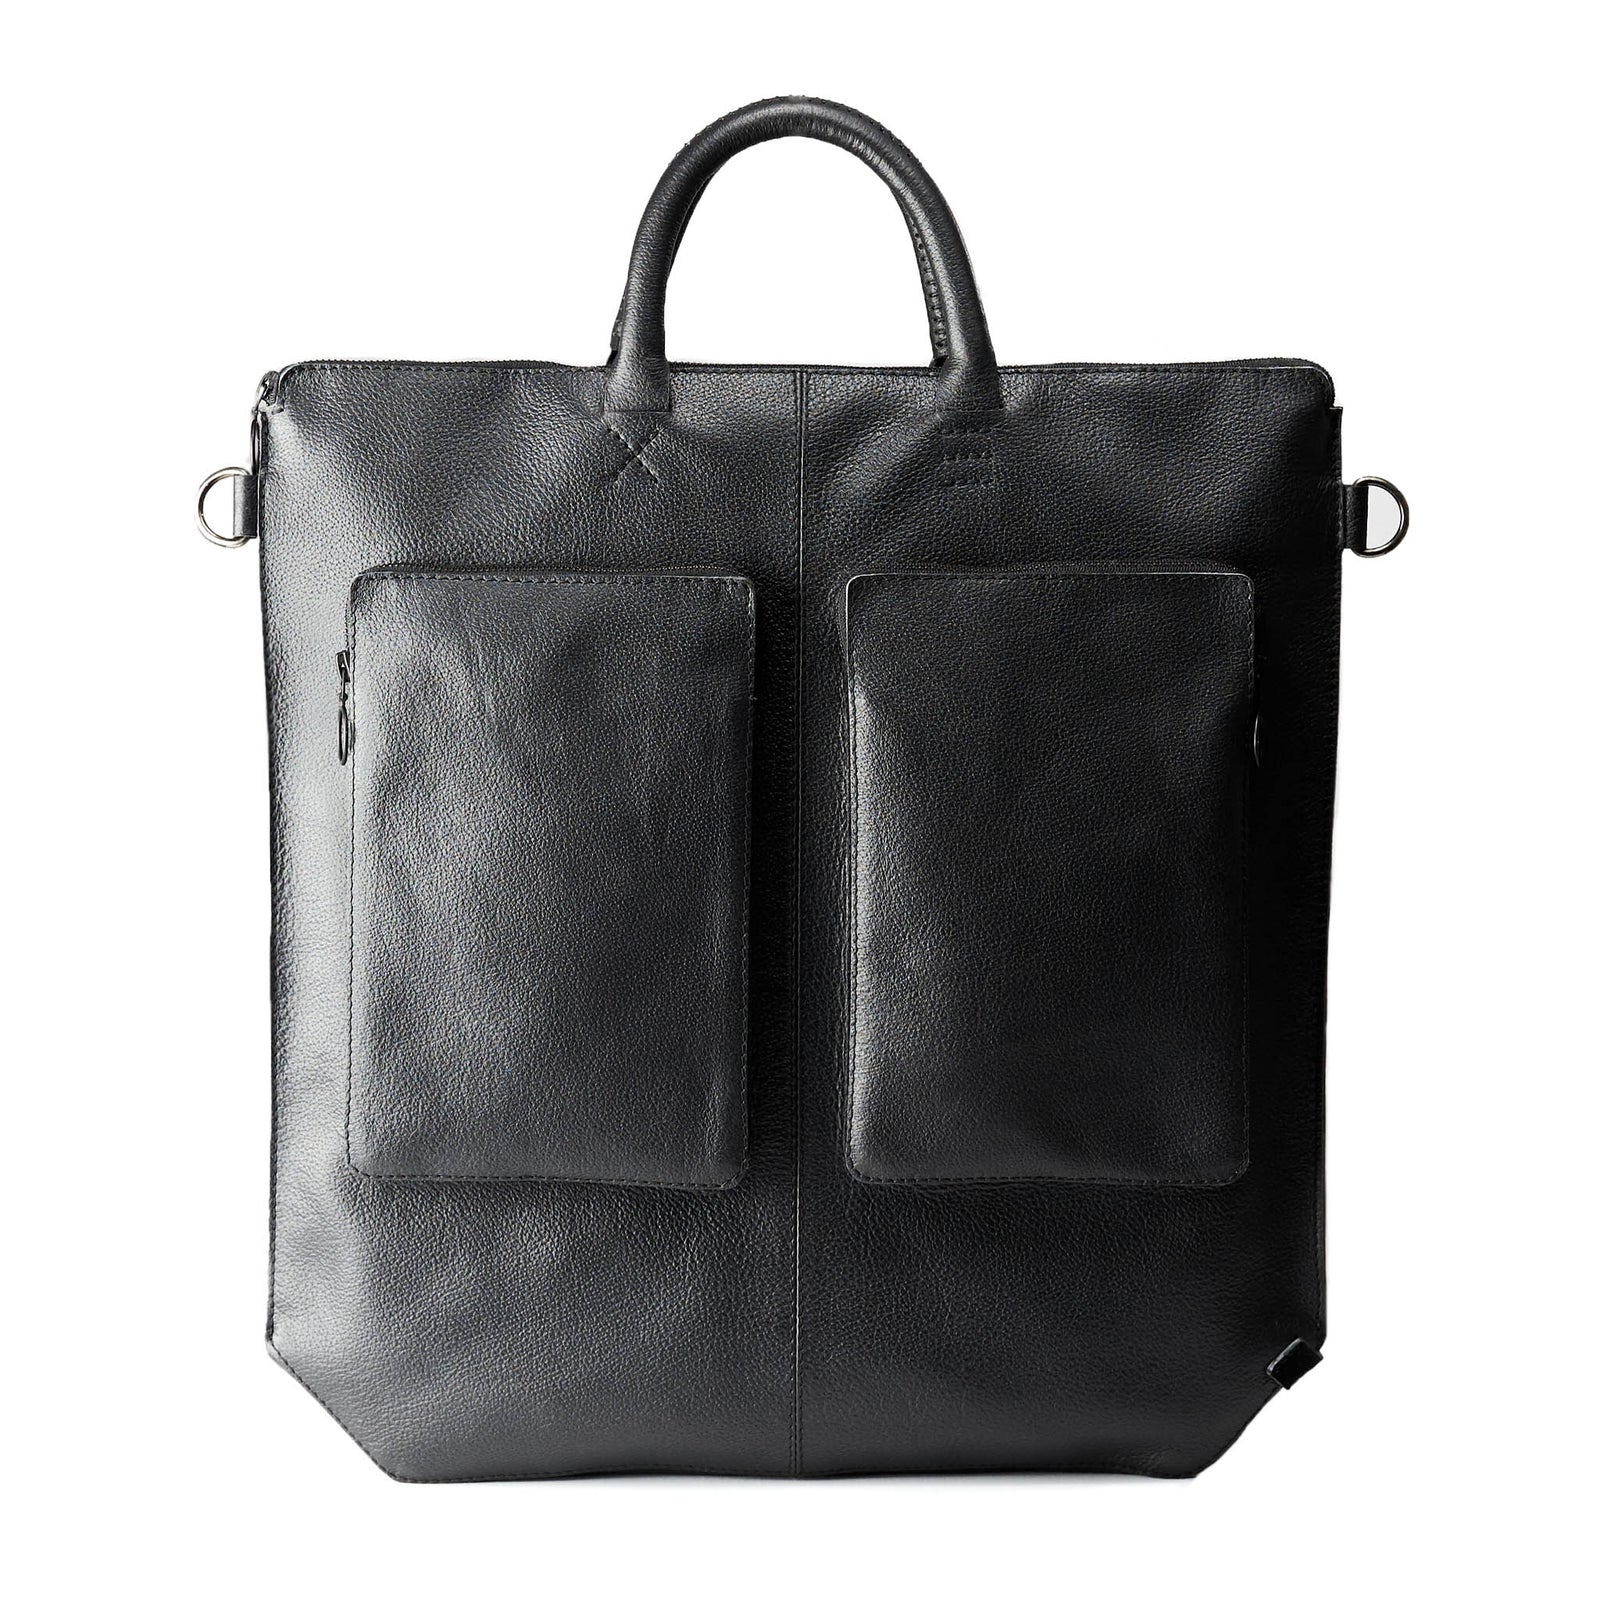 Front side in leather. Black tote zipper bag by Capra Leather. Handmade men work bag.